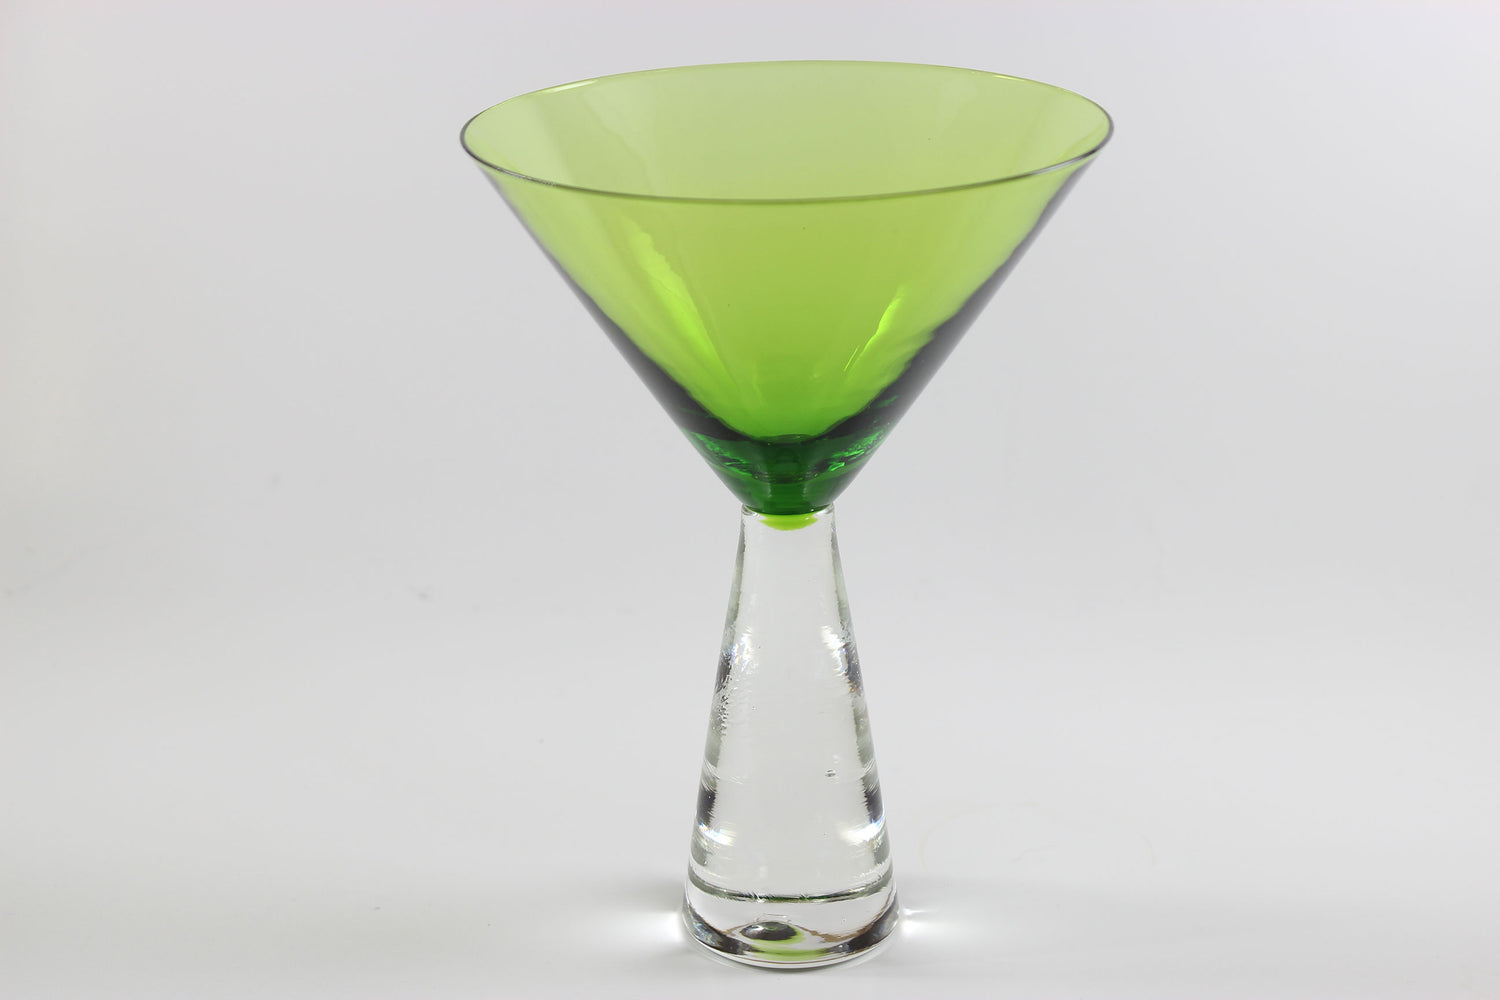 Large, Heavy Crystal, Martini Glasses, Green Bowl